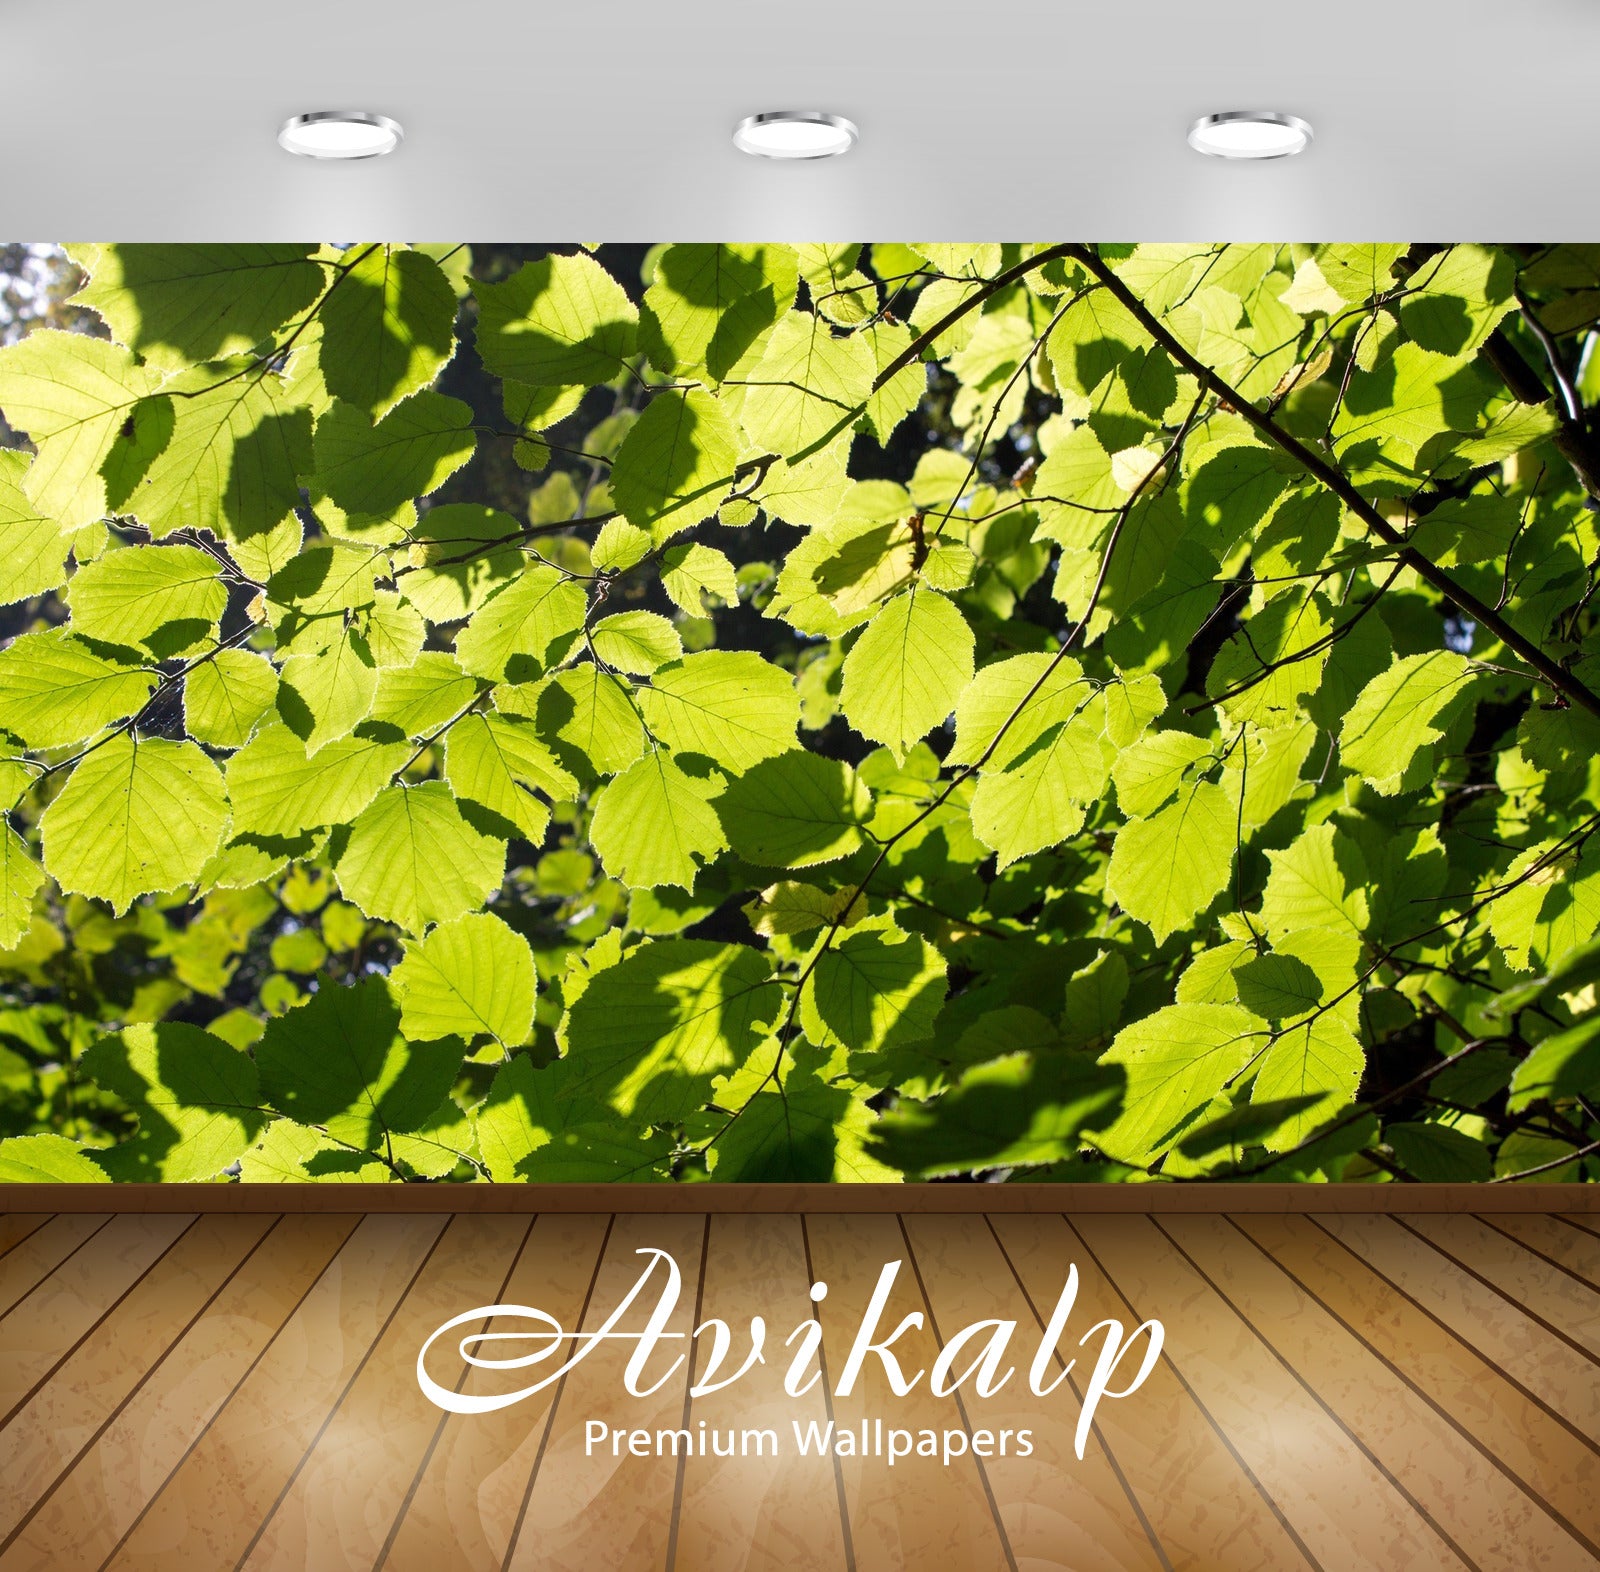 Avikalp Exclusive Awi5574 Green Linden Leaves Nature Full HD Wallpapers for Living room, Hall, Kids